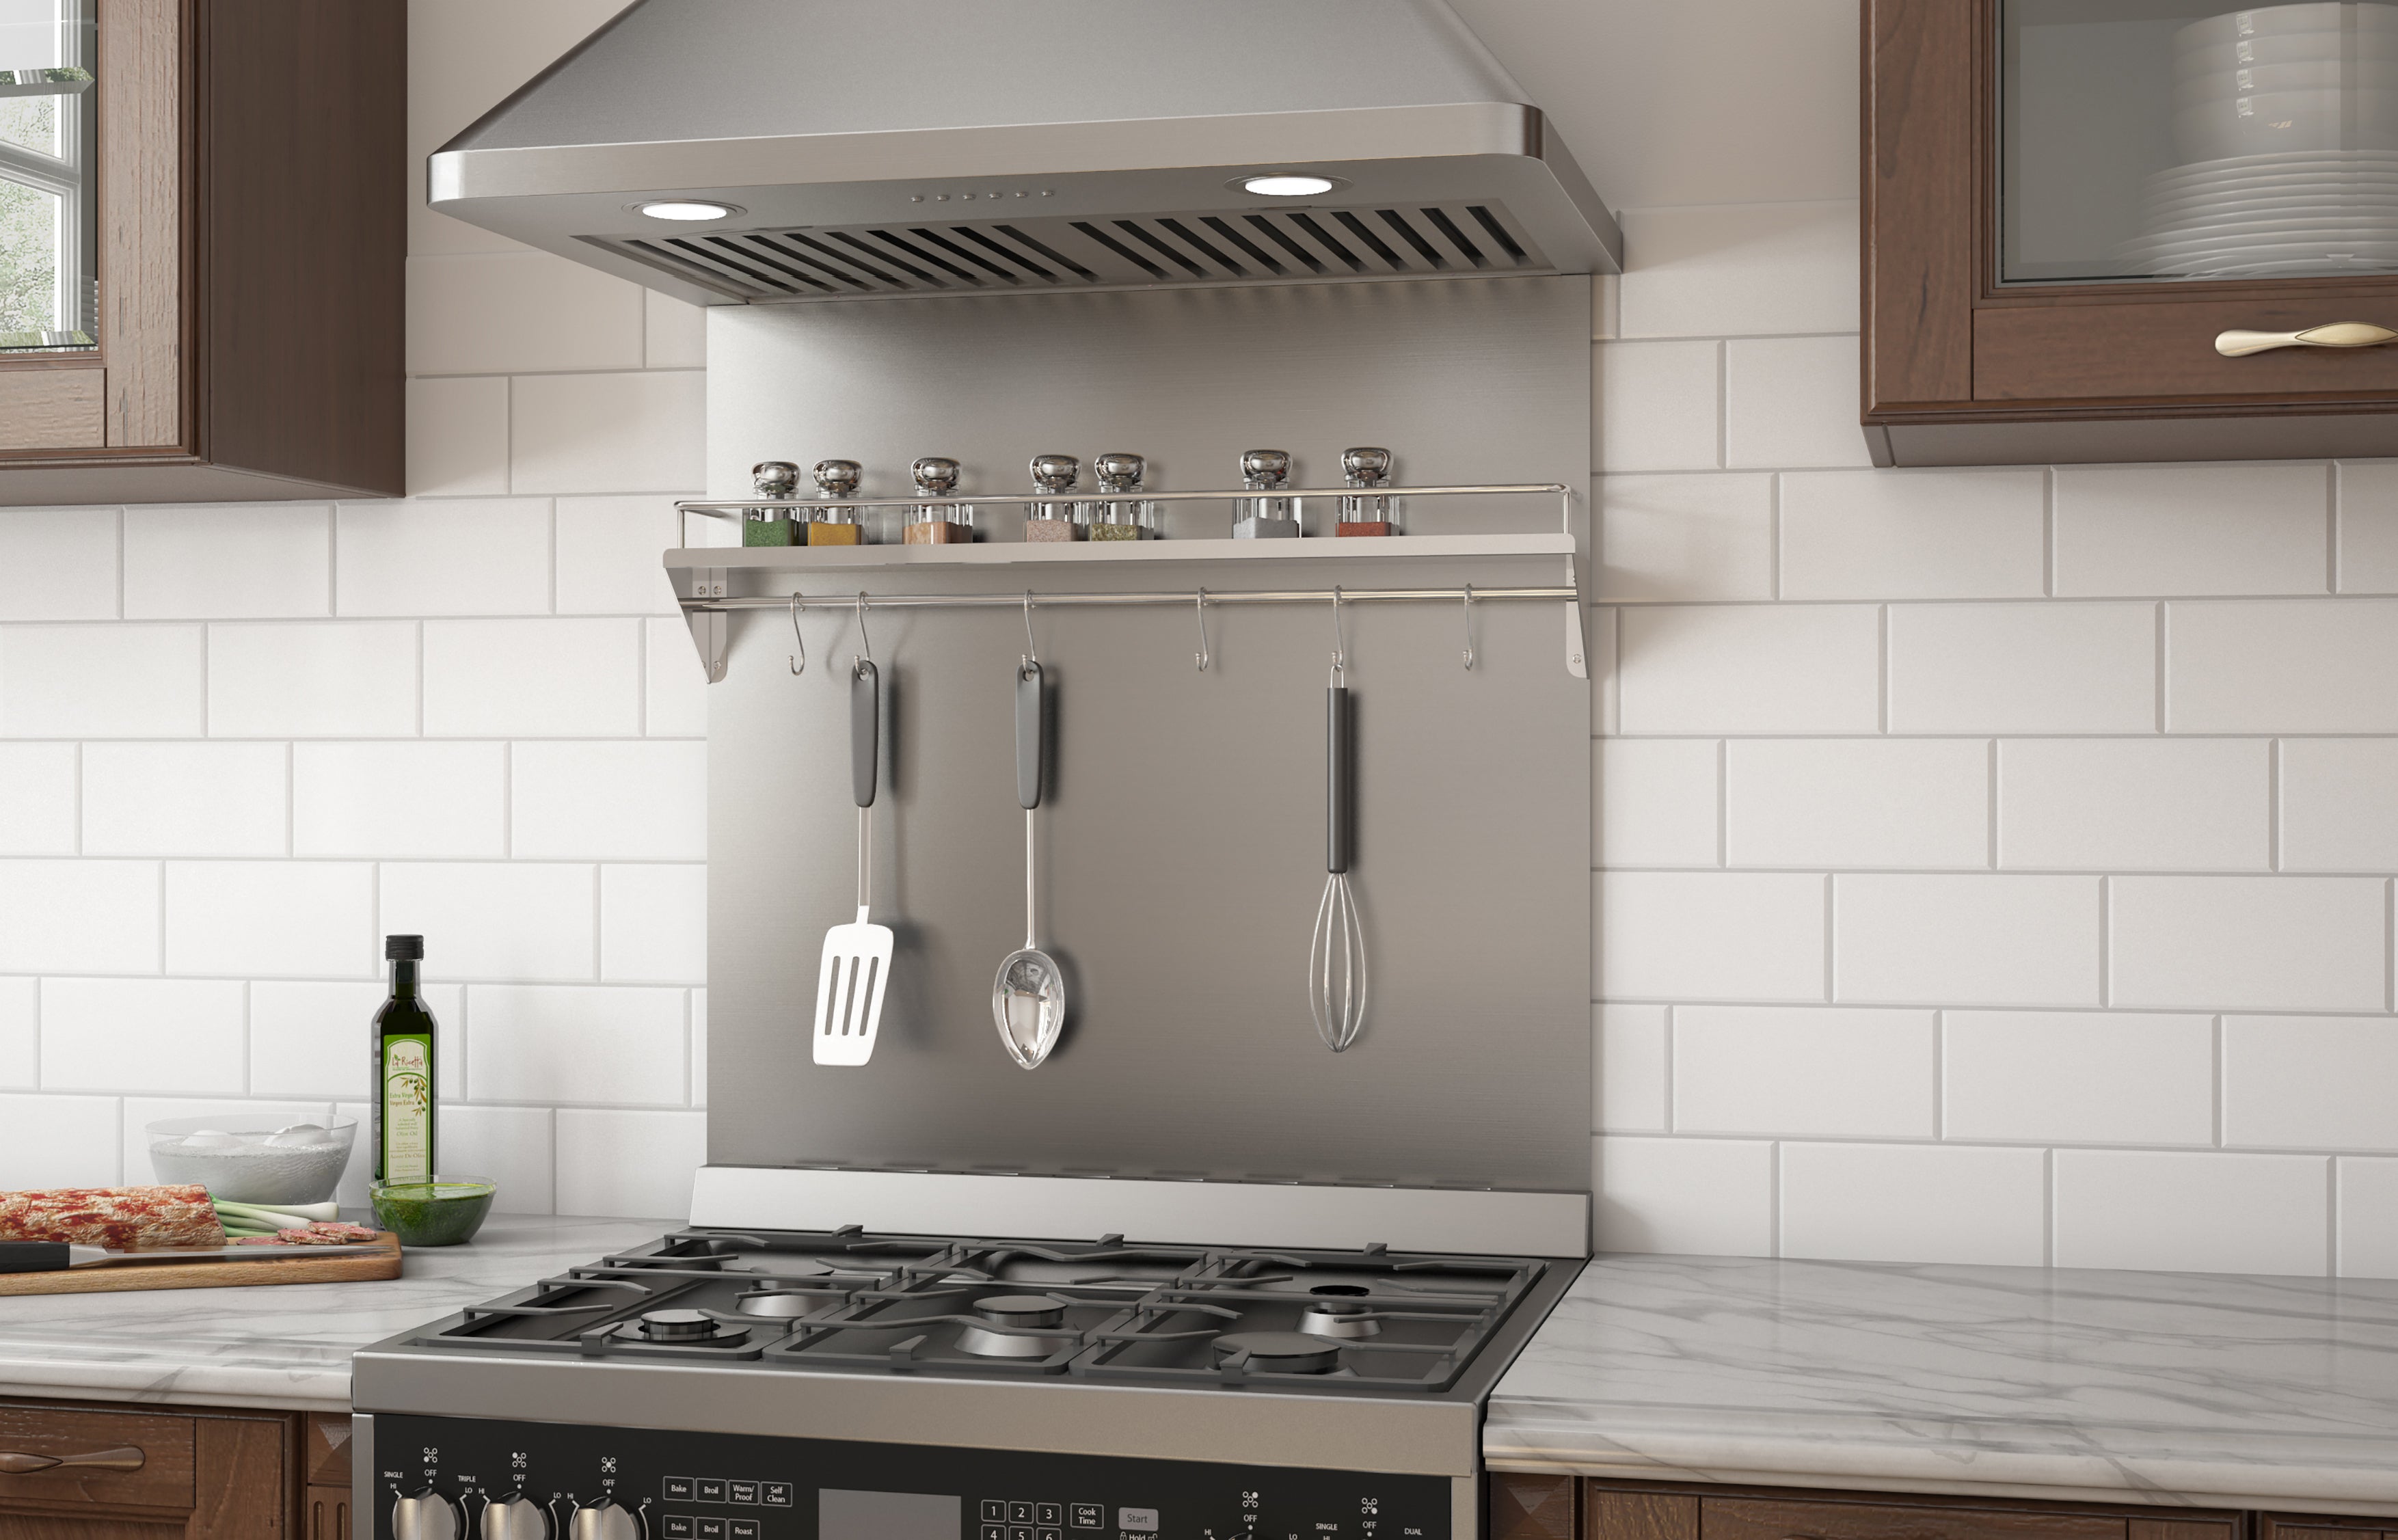 30 in. Stainless Steel Backsplash with Shelf and Rack